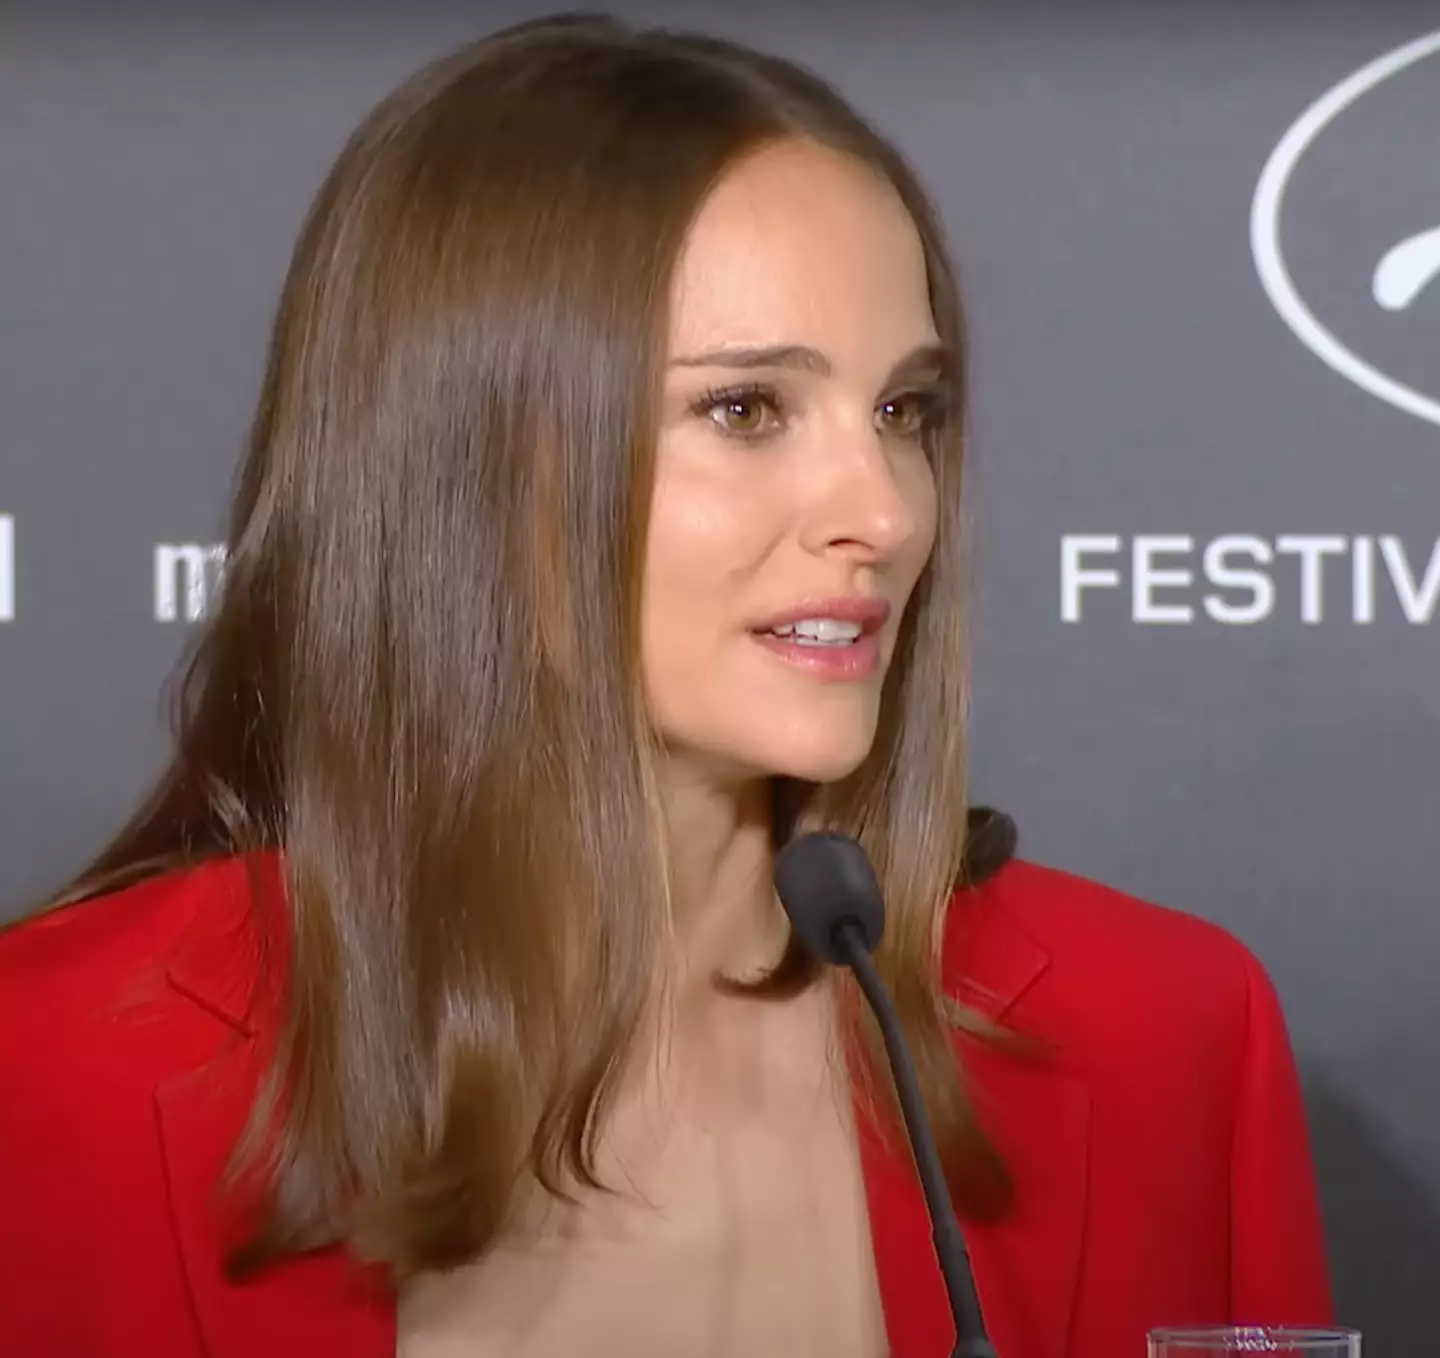 Portman during the Cannes press conference.